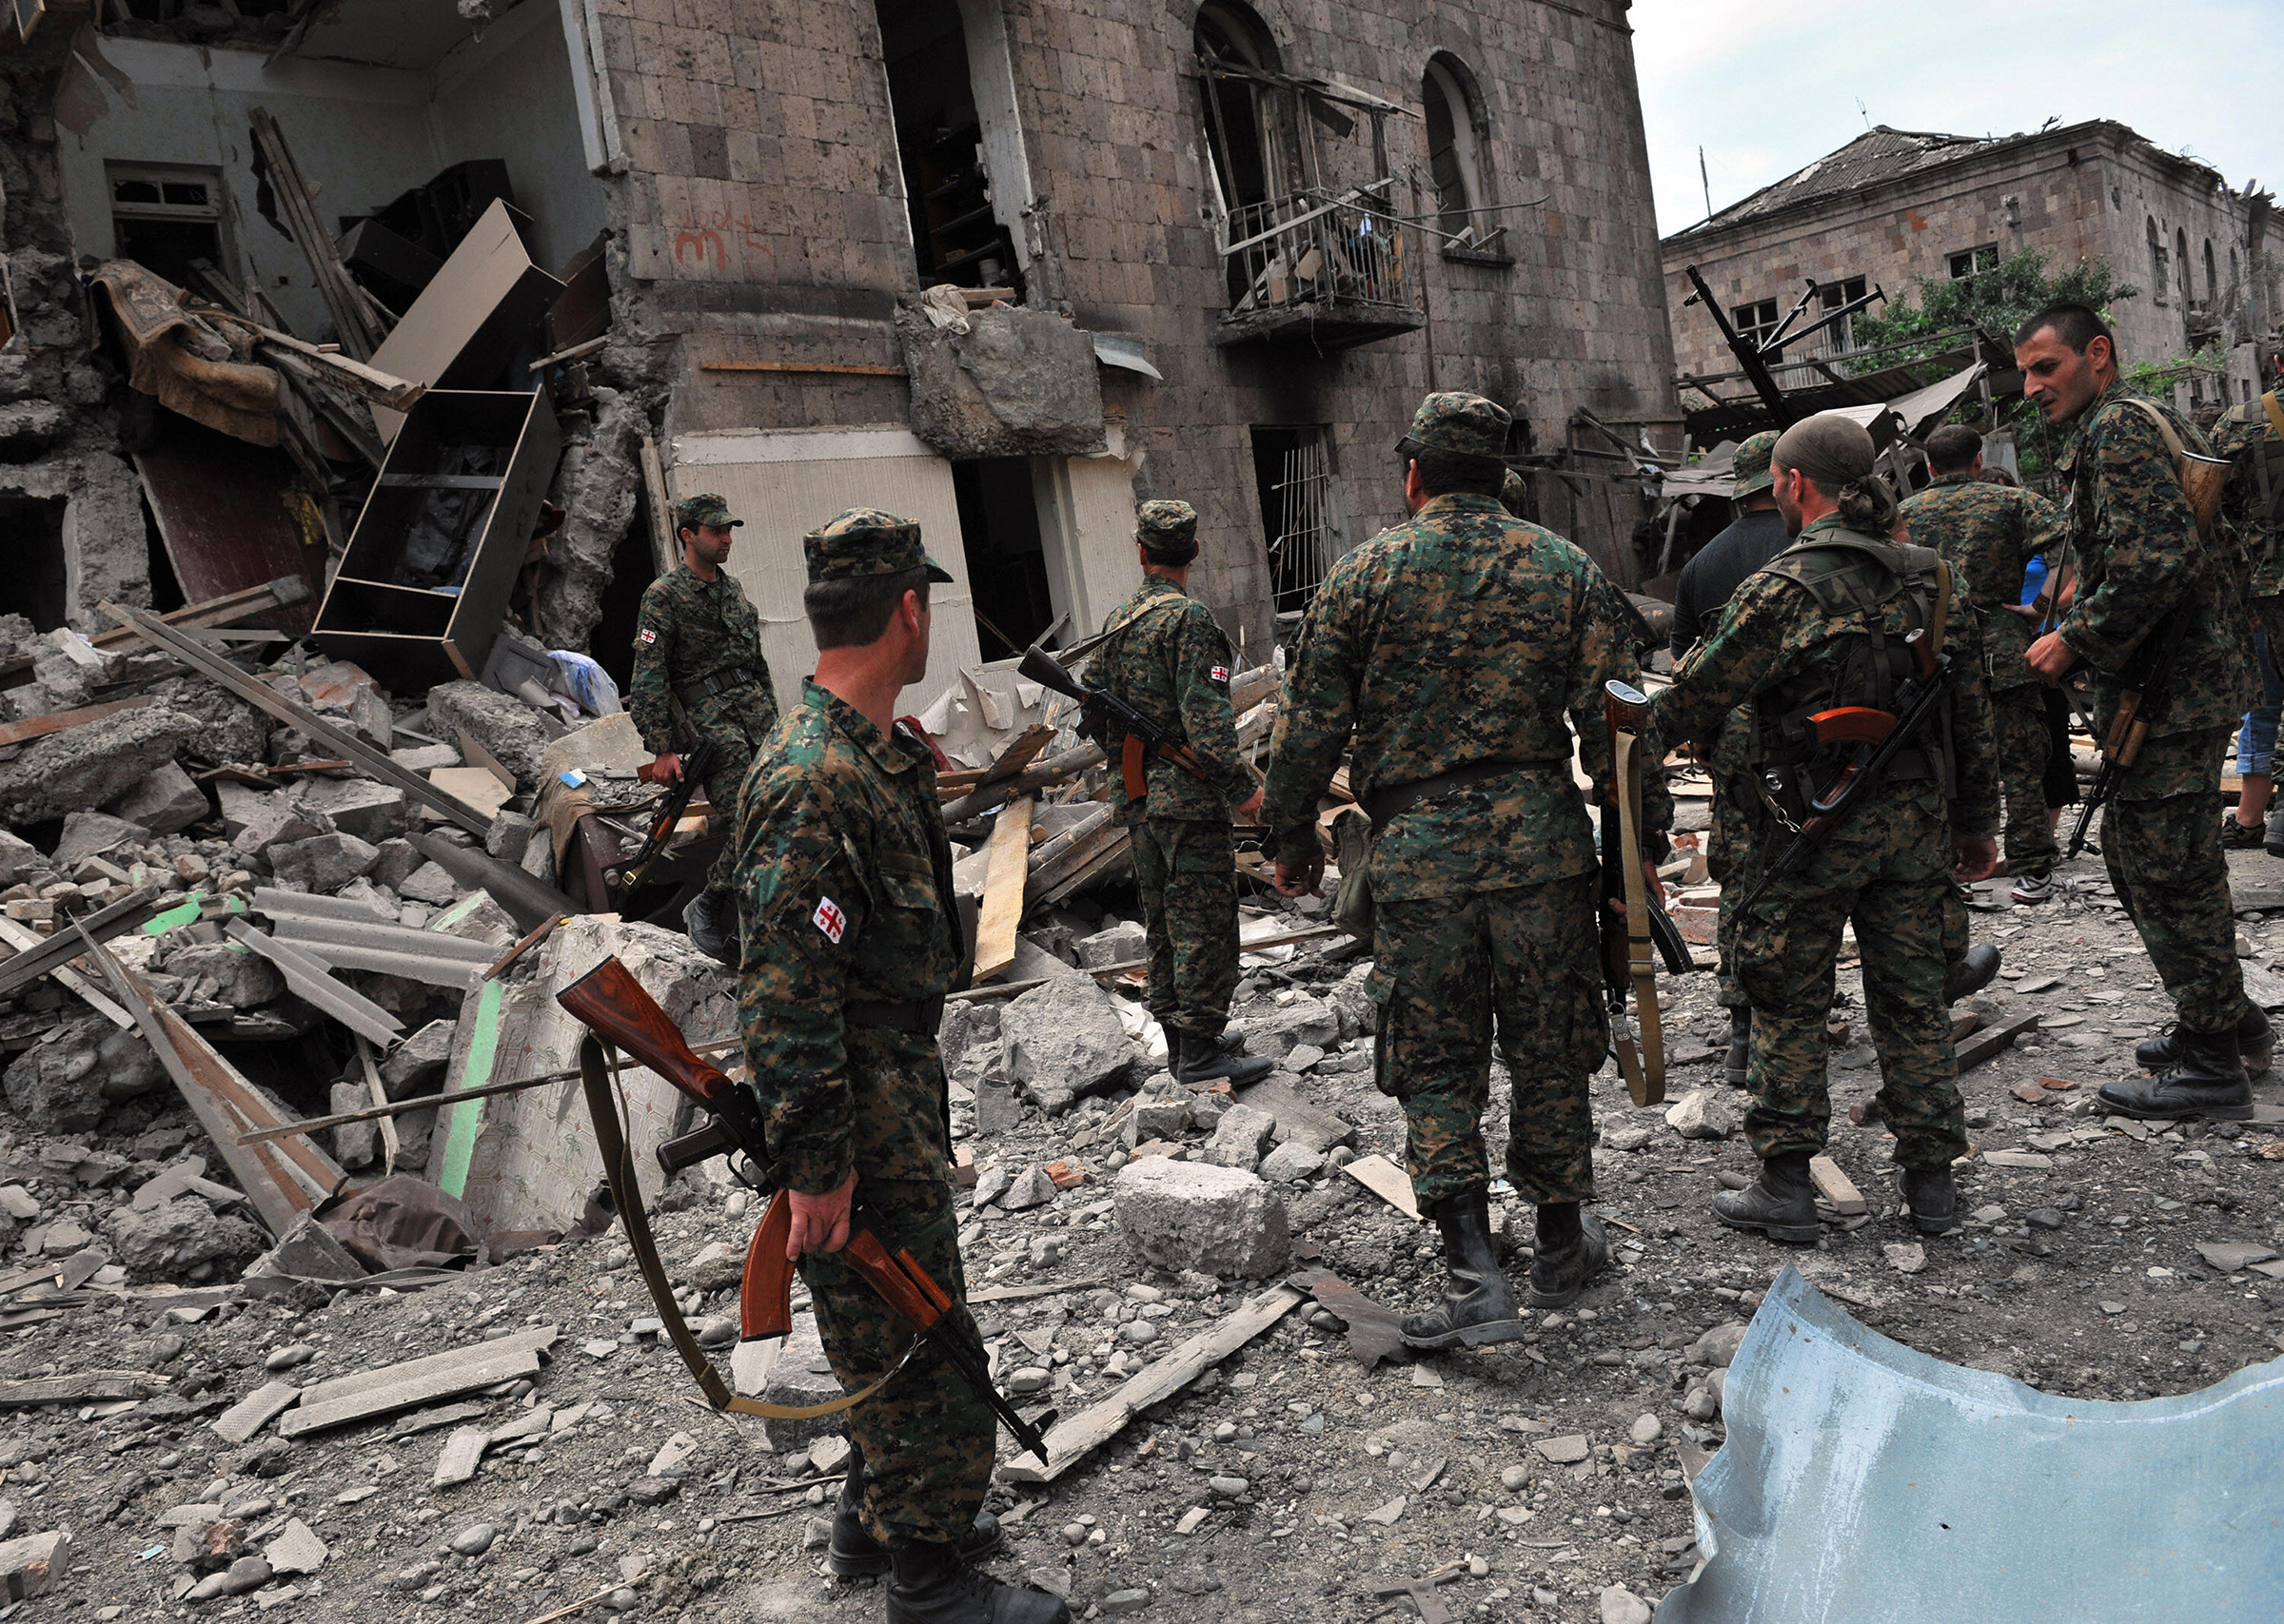 Georgian soldiers watch a building hit by bombardments in Gori on August 9, 2008. Georgian President Mikheil Saakashvili declared a "state of war" on August 9 as his troops battled it out with Russian forces over the breakaway province of South Ossetia. Russian warplanes bombed the Georgian city of Gori killing civilians. (Dimitar Dolkoff—AFP/Getty Images)